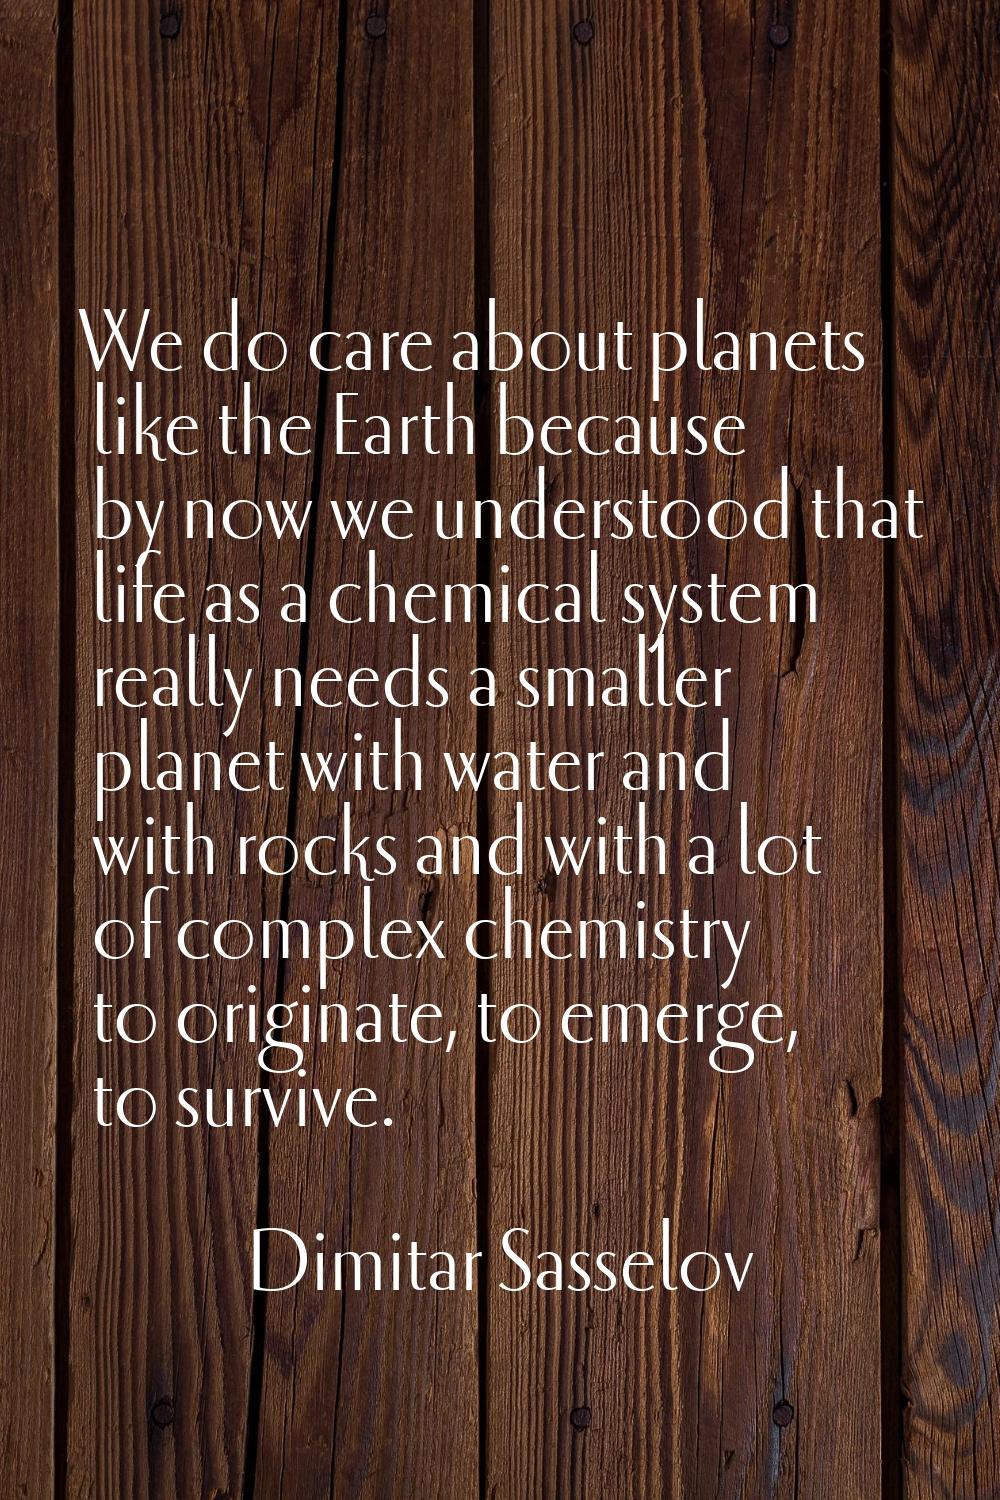 We do care about planets like the Earth because by now we understood that life as a chemical system